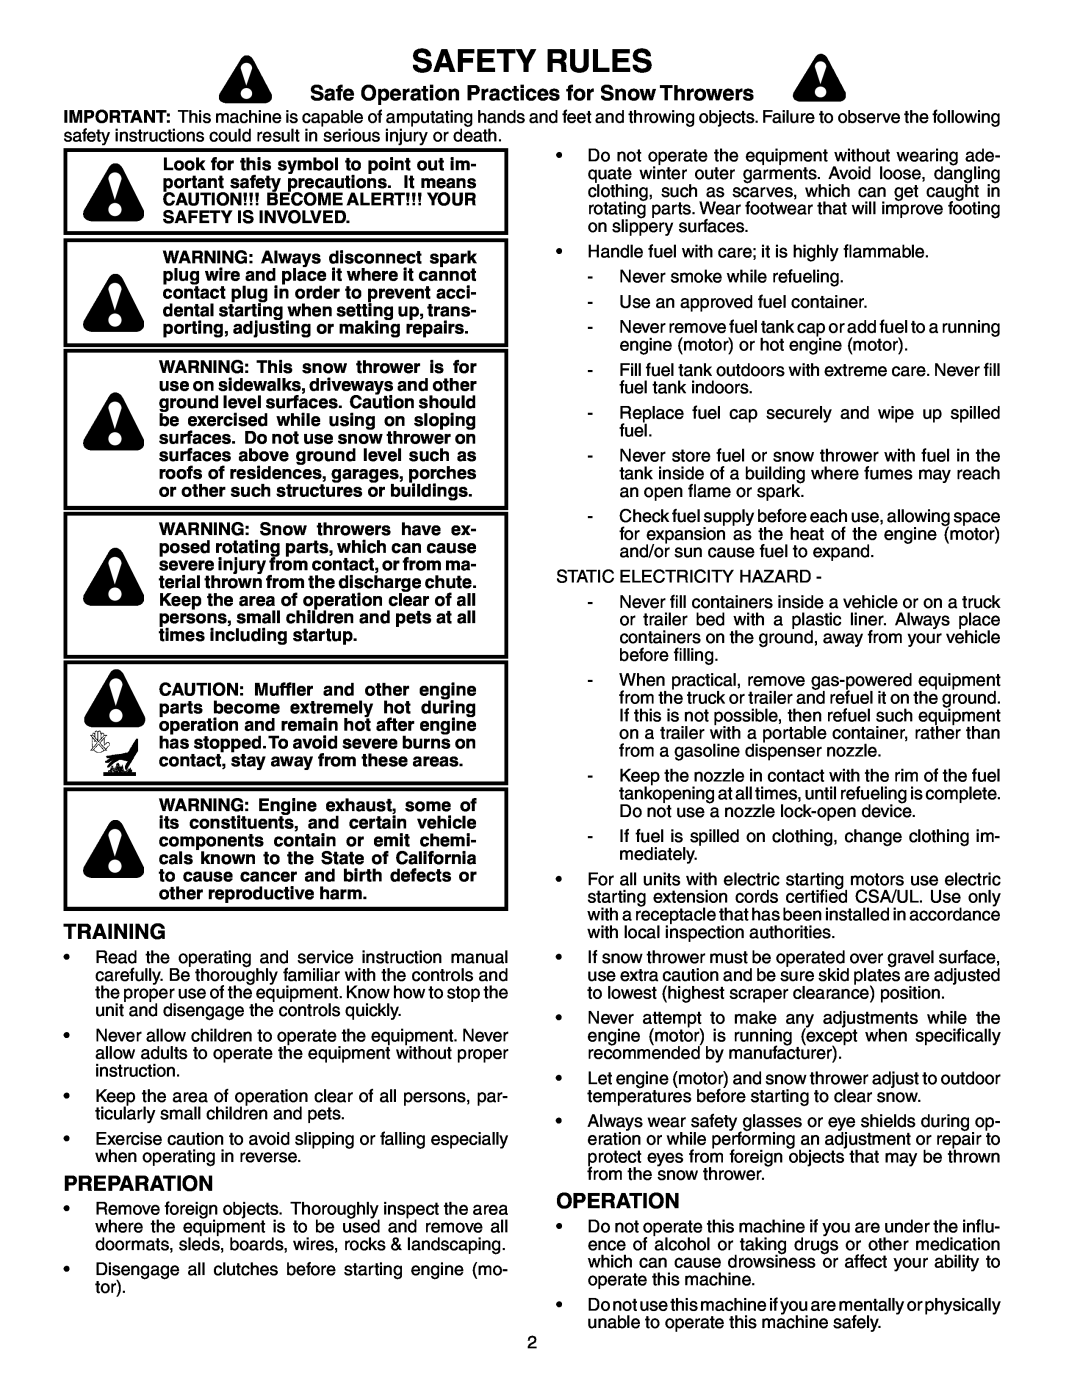 Poulan PO10527ESA owner manual Safety Rules, Safe Operation Practices for Snow Throwers, Training, Preparation 